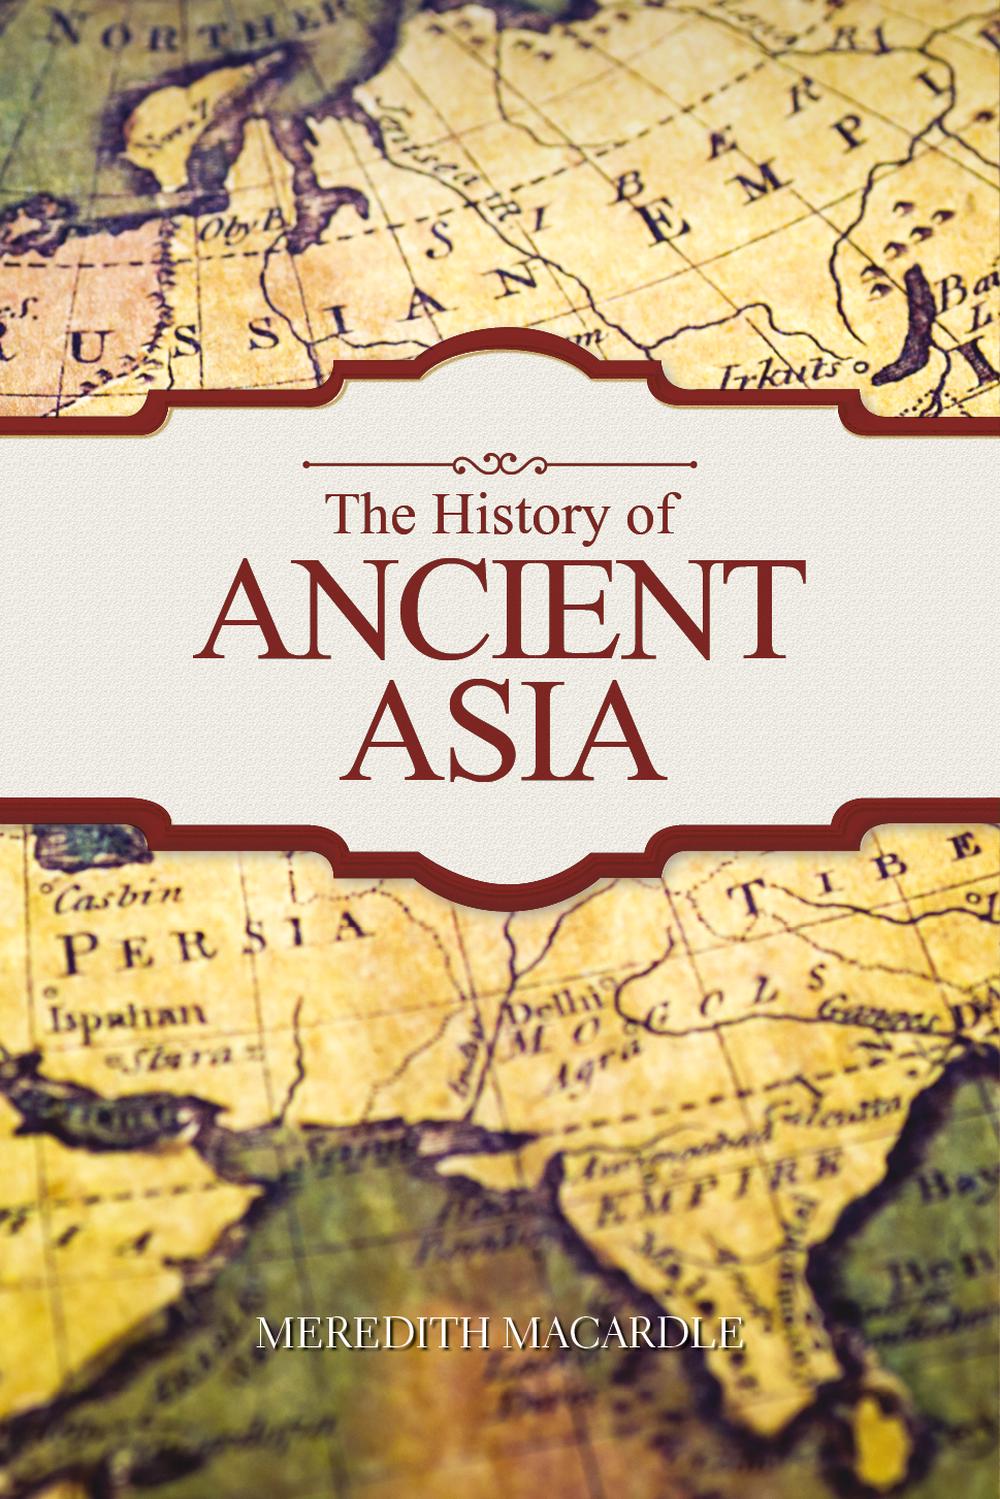 History of Ancient Asia by Meredith Macardle (English) Paperback Book ... - 9781849311625